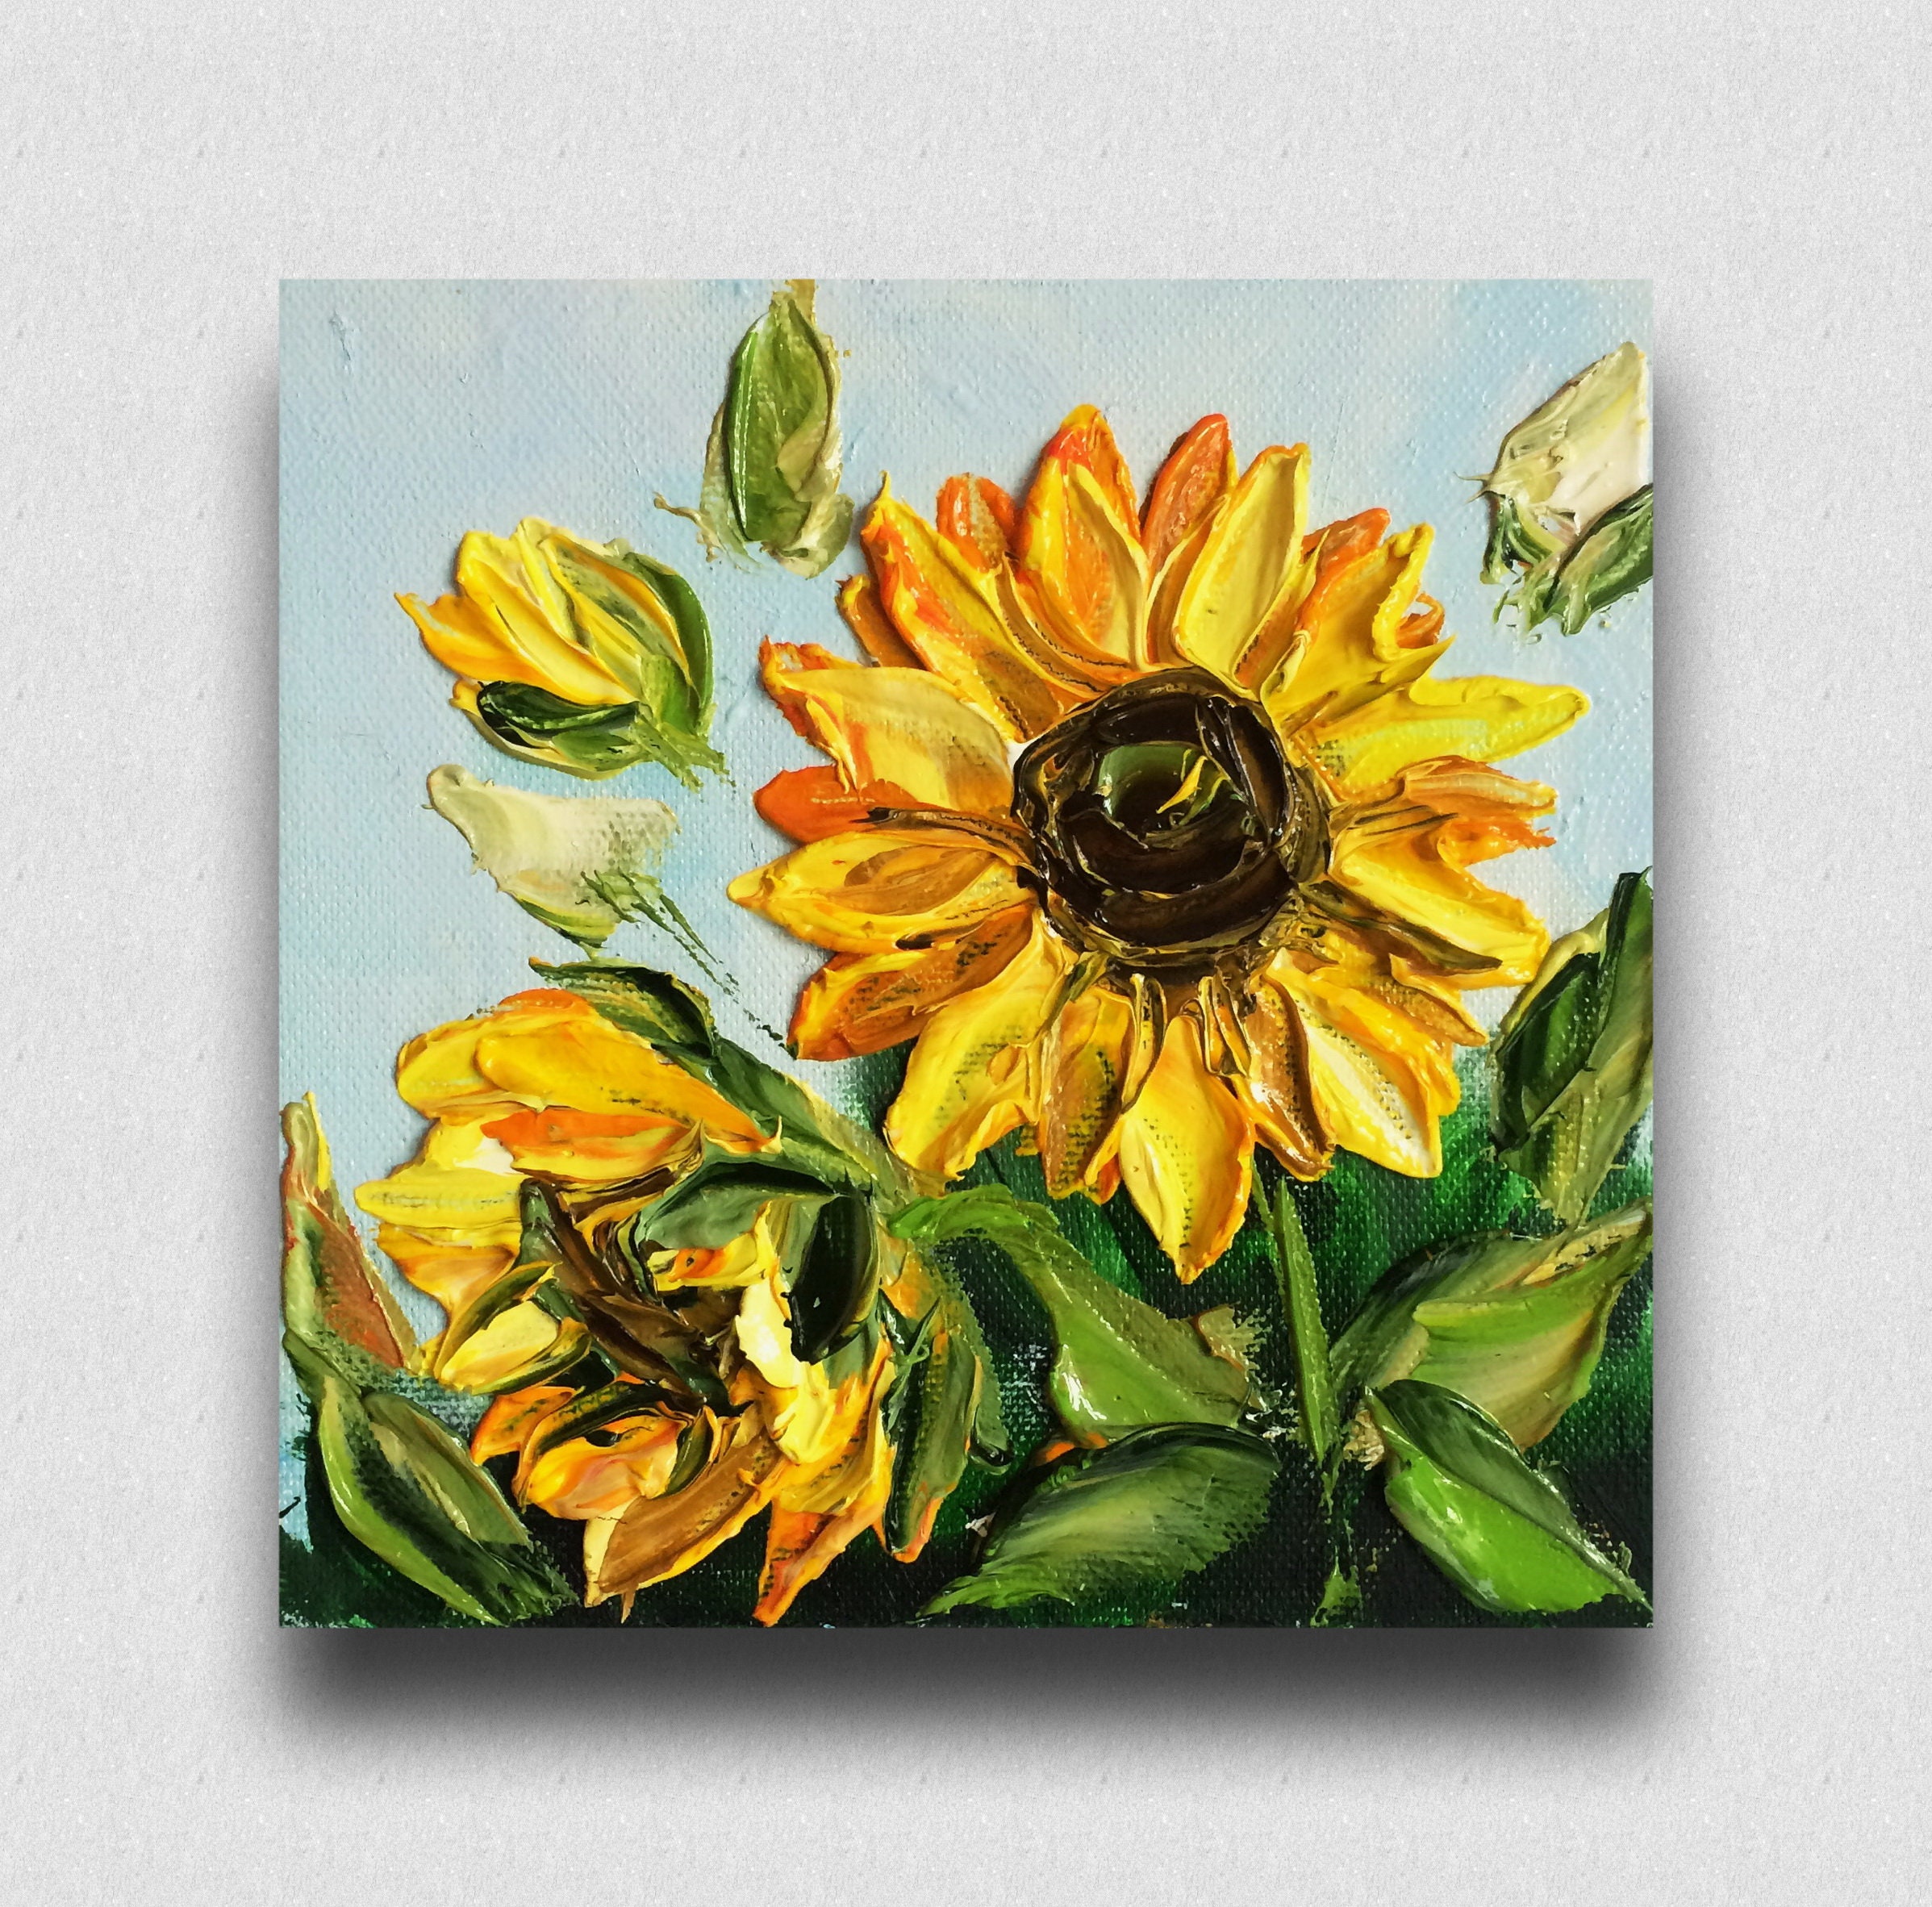 Buy Floral Painting Flower Painting Yellow Canvas. in Art. Little Miniature. Etsy Present. Sunflower - an Online of Sunflower Easel. With on Wall Miniature India a